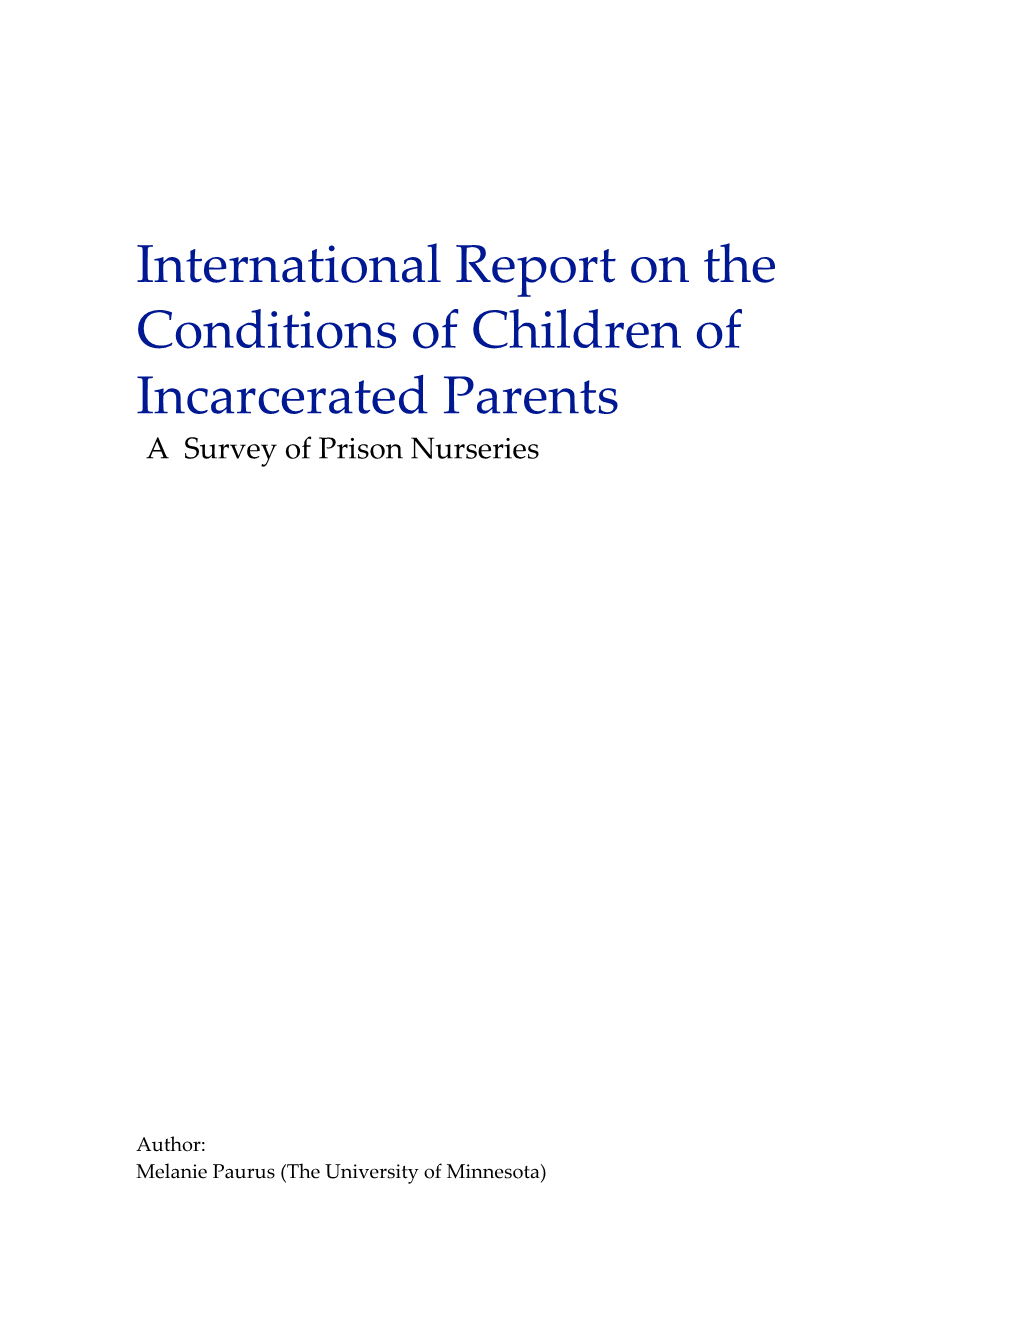 International Report on the Conditions of Children of Incarcerated Parents a Survey of Prison Nurseries